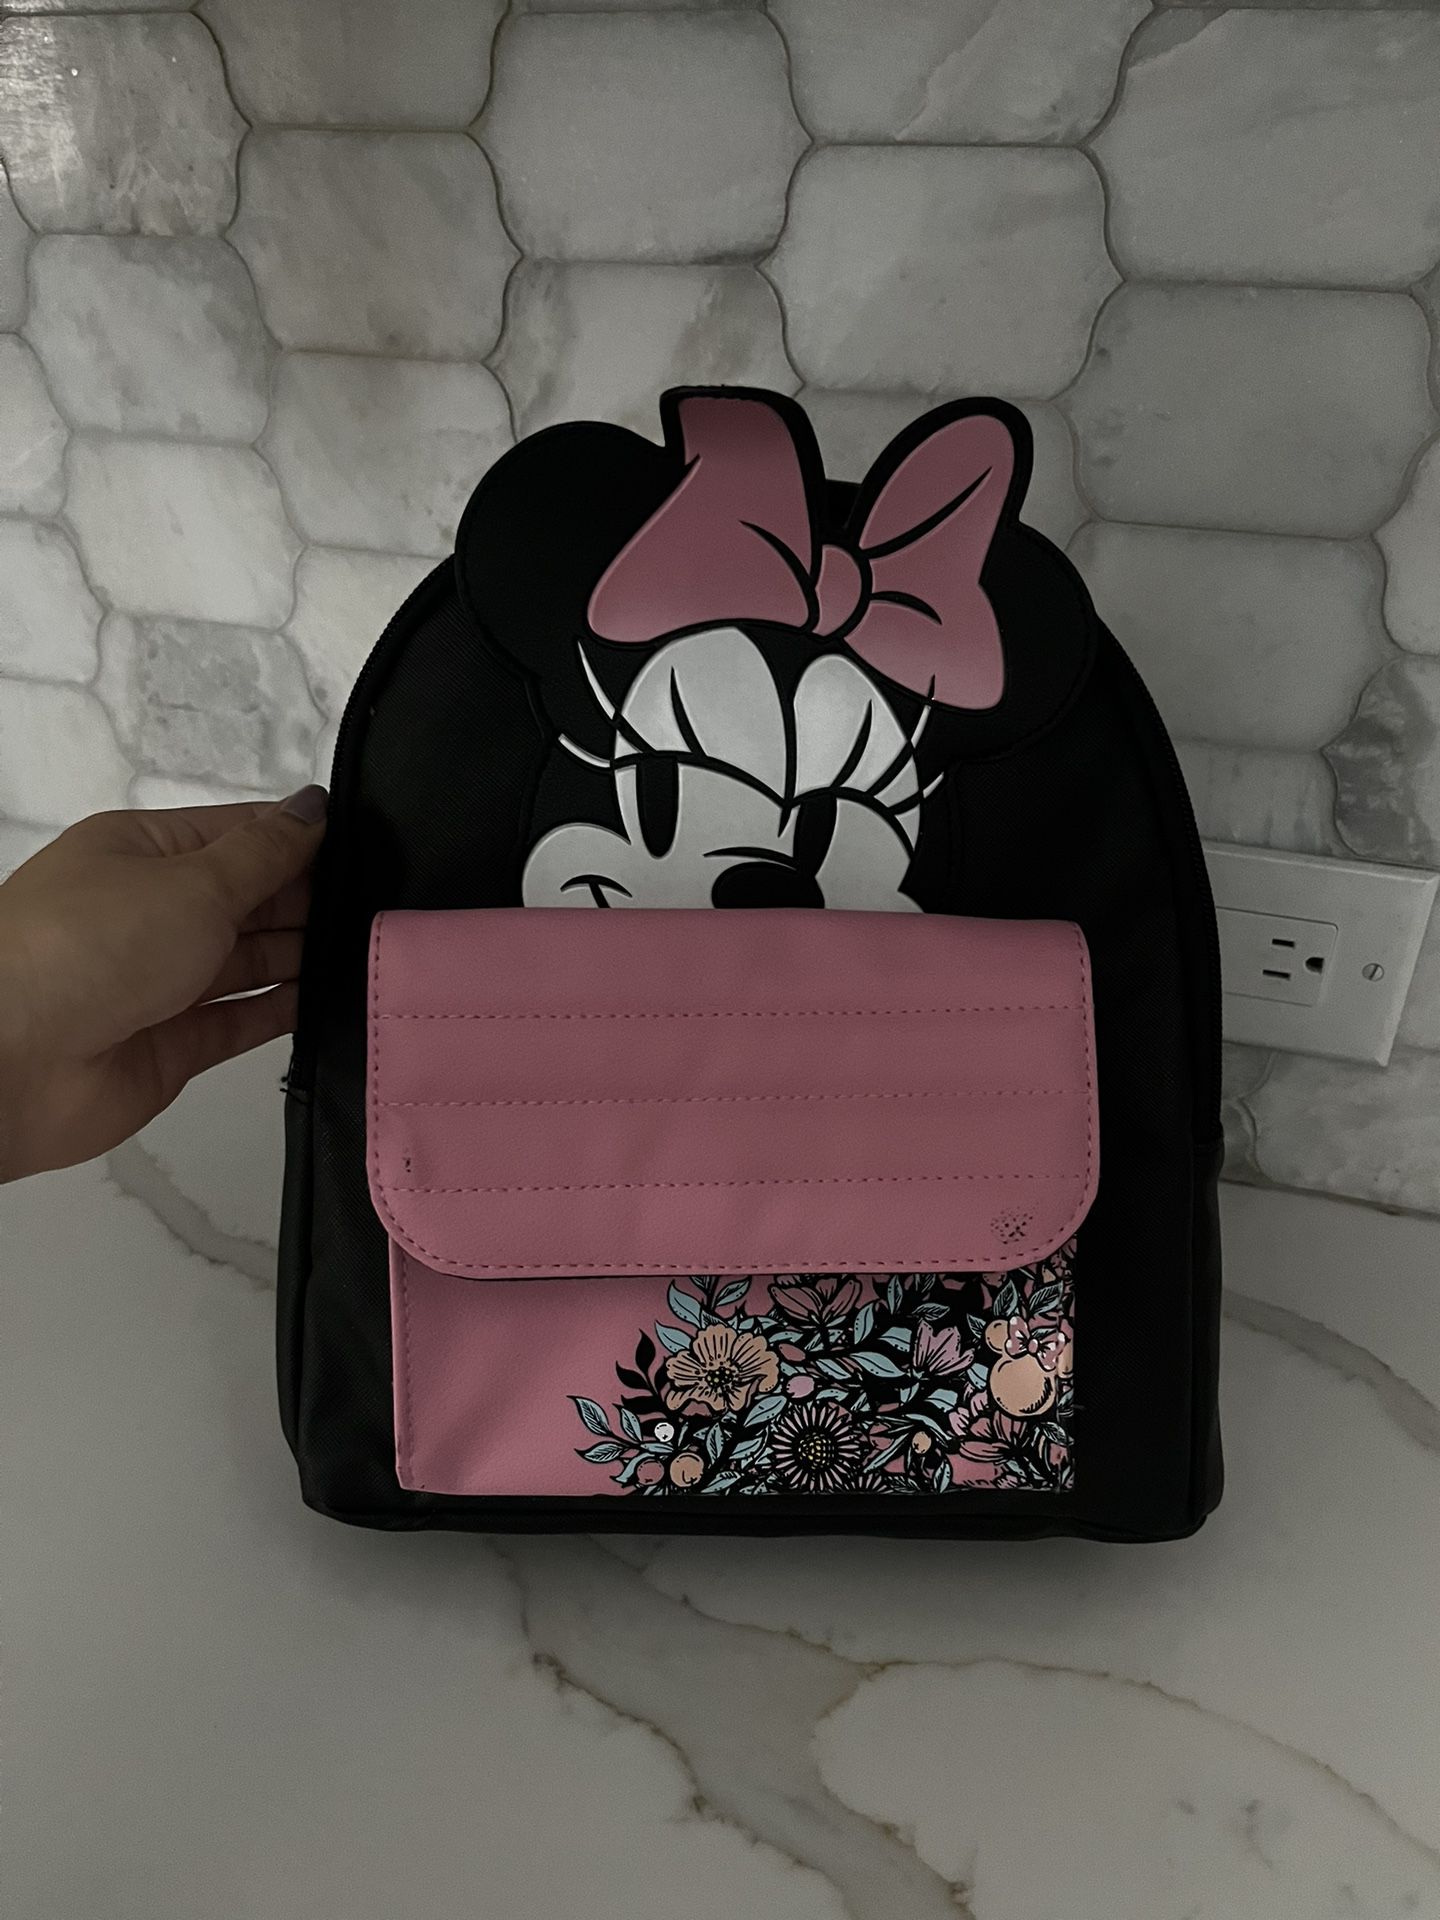 Minnie Mouse Backpack New With Tags 